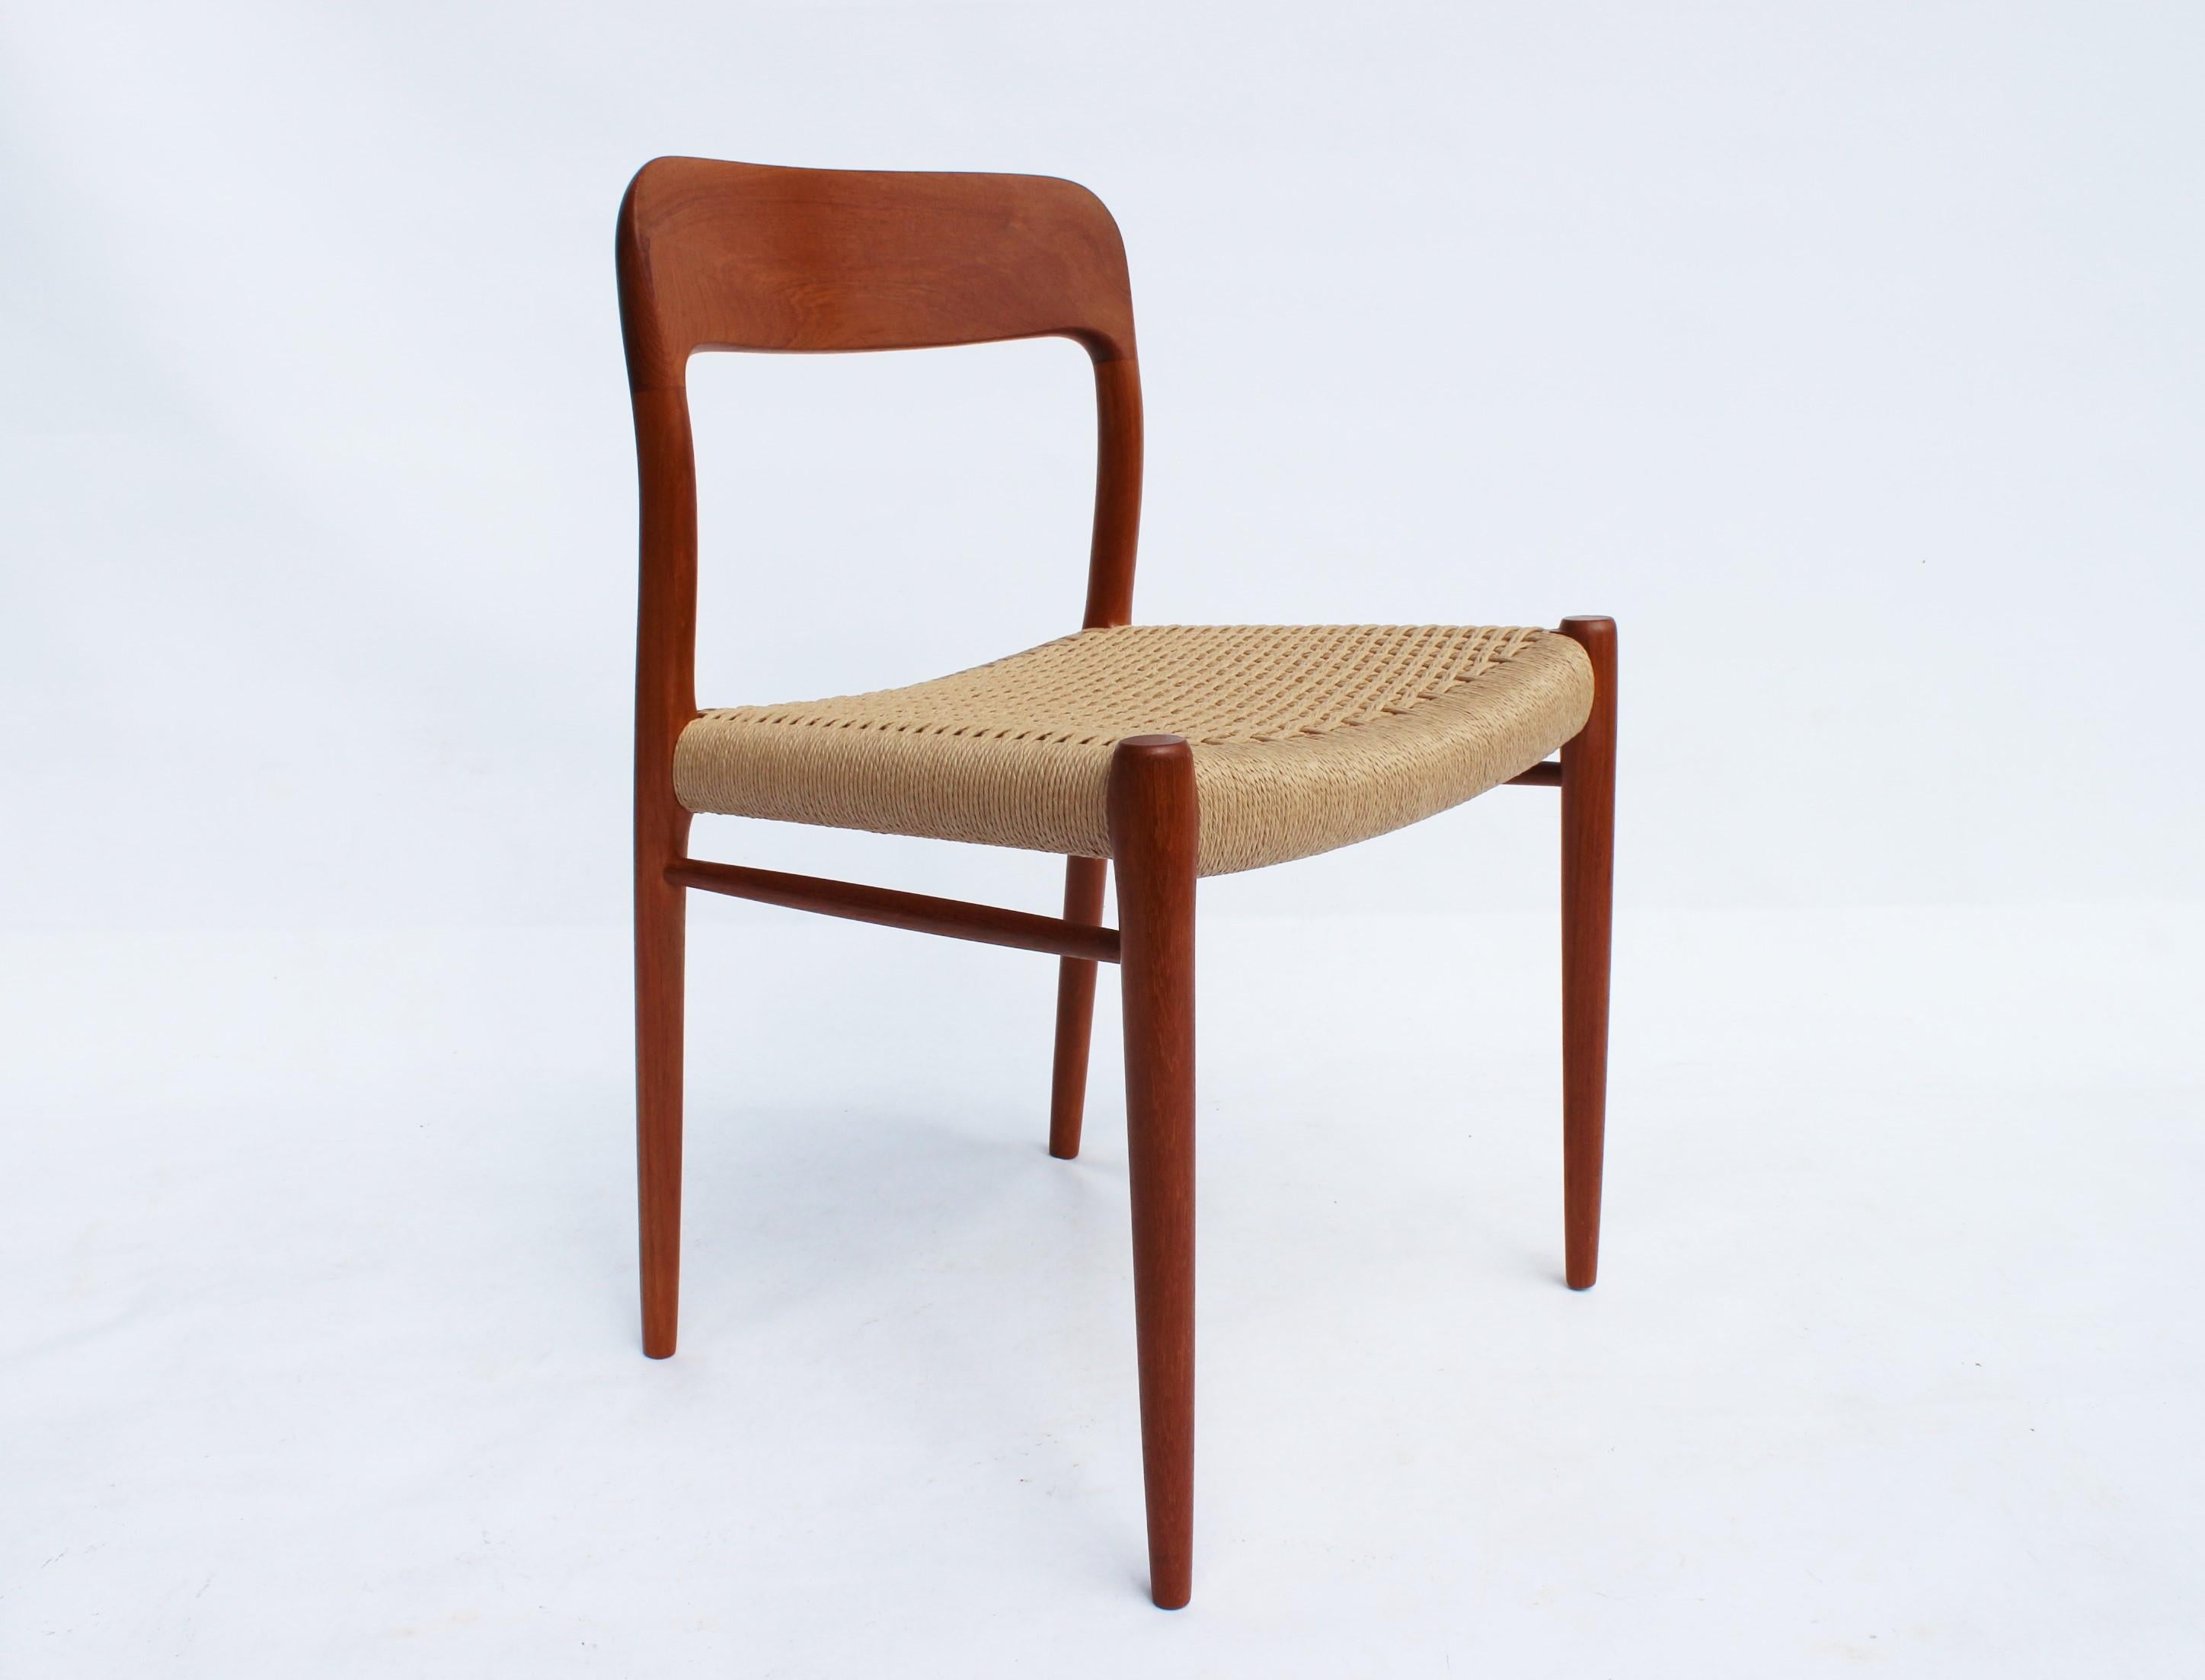 A set of four dining chairs, model 75, in teak and papercord designed by N.O. Møller from the 1960s. The chairs are in great vintage condition.